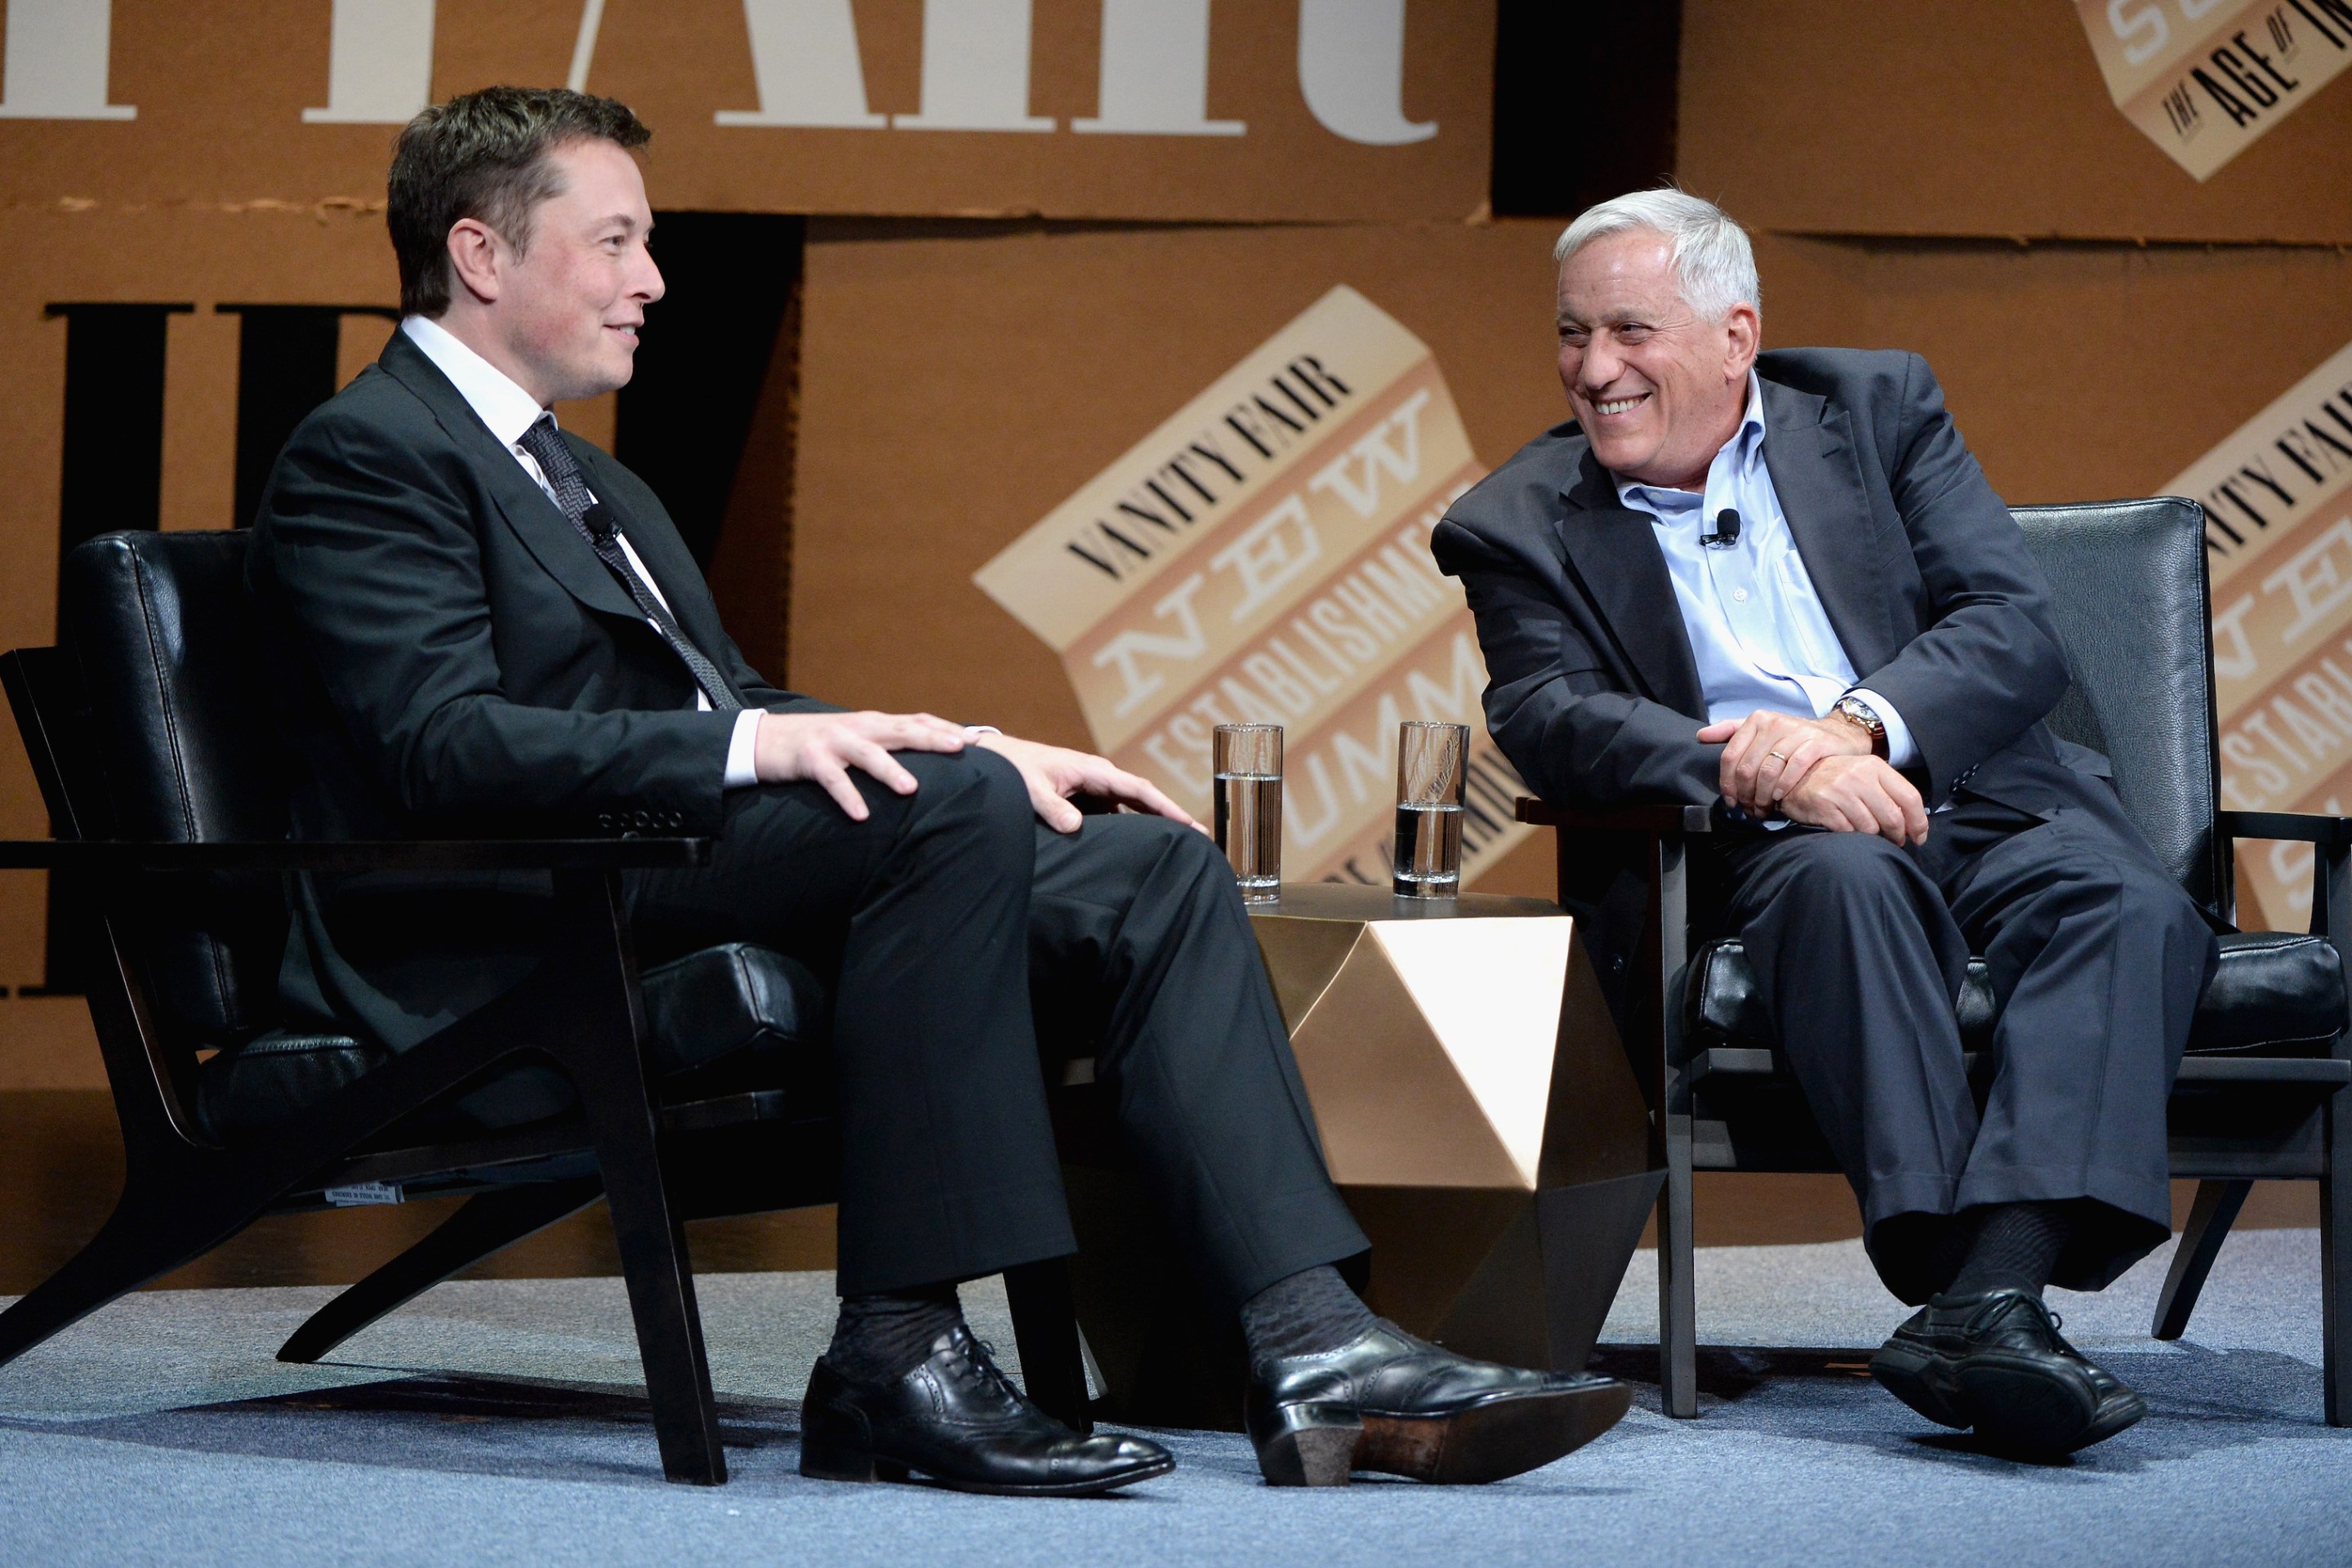 Walter Isaacson (right) and Elon Musk (left) speak onstage at the Vanity Fair New Establishment Summit back in 2014, long before Isaacson wrote a big biography of Musk.